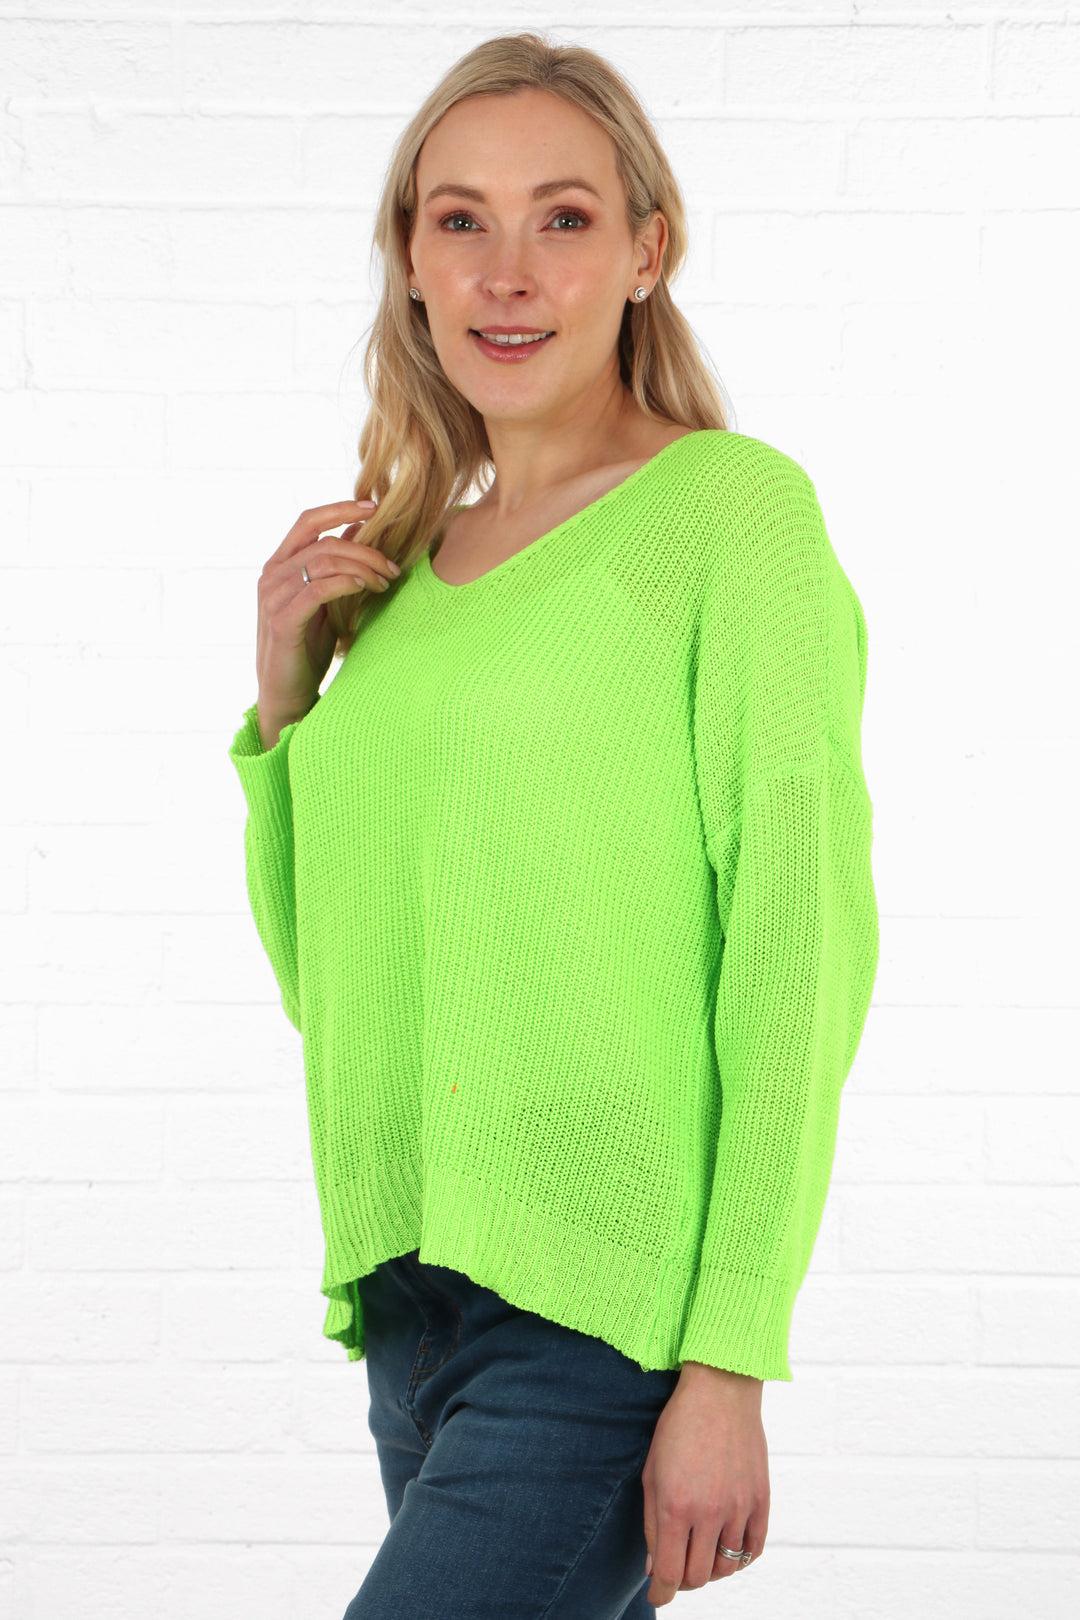 model wearing a v neck long sleeve green cotton knitted jumper